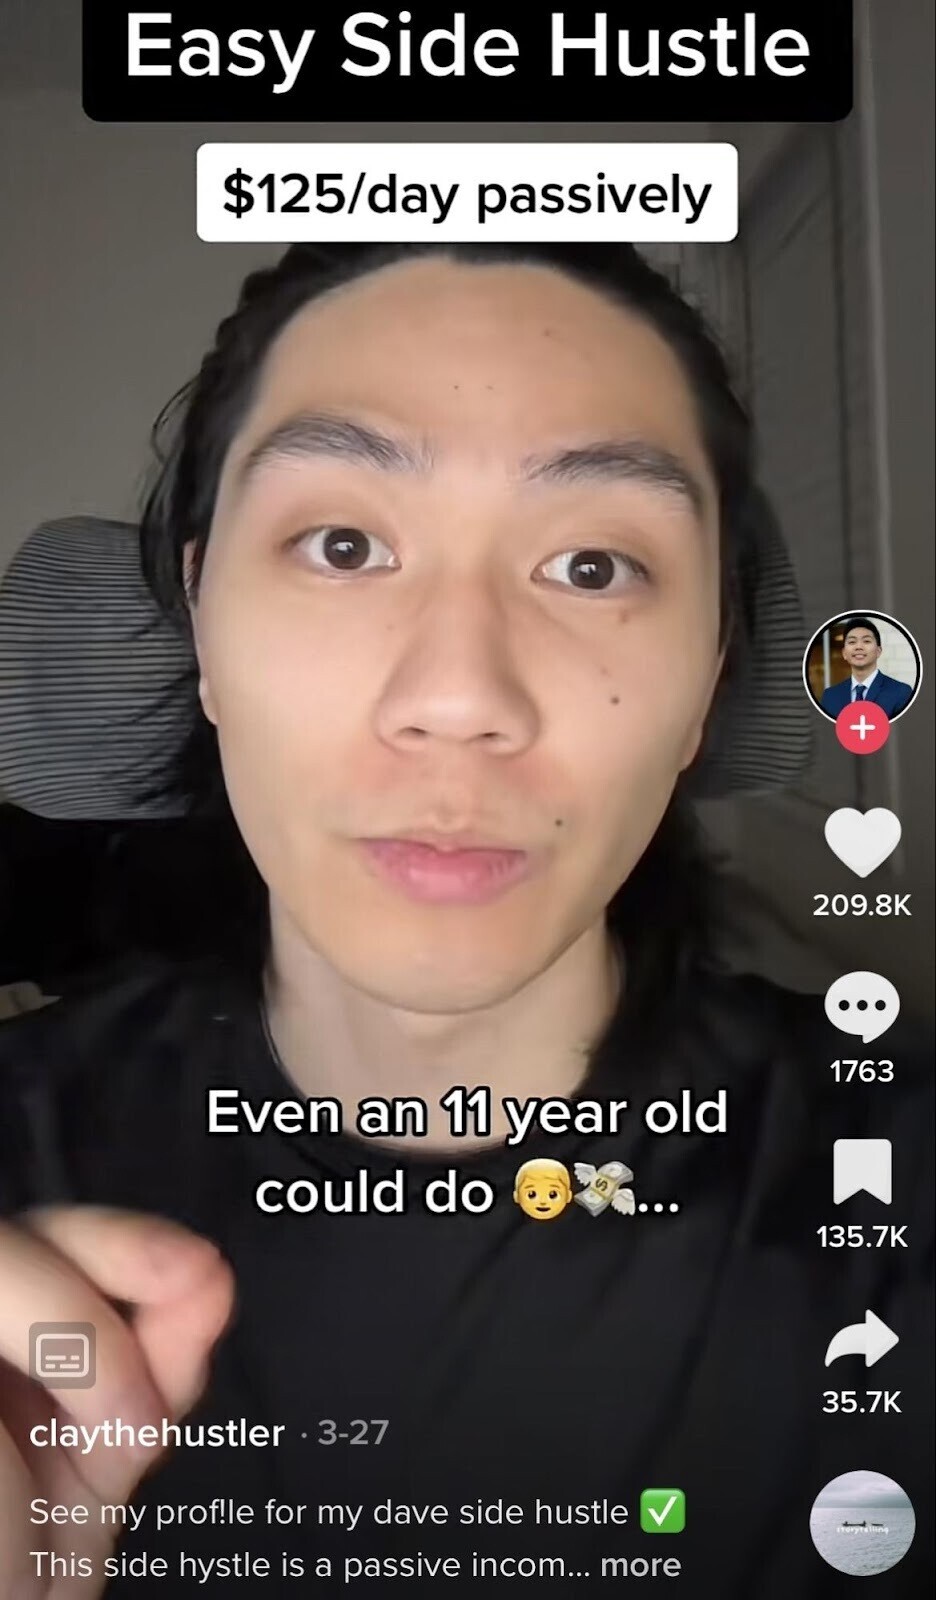 TikTok’s For You Page showing a video from the user @claythehustler about financial and passive income tips